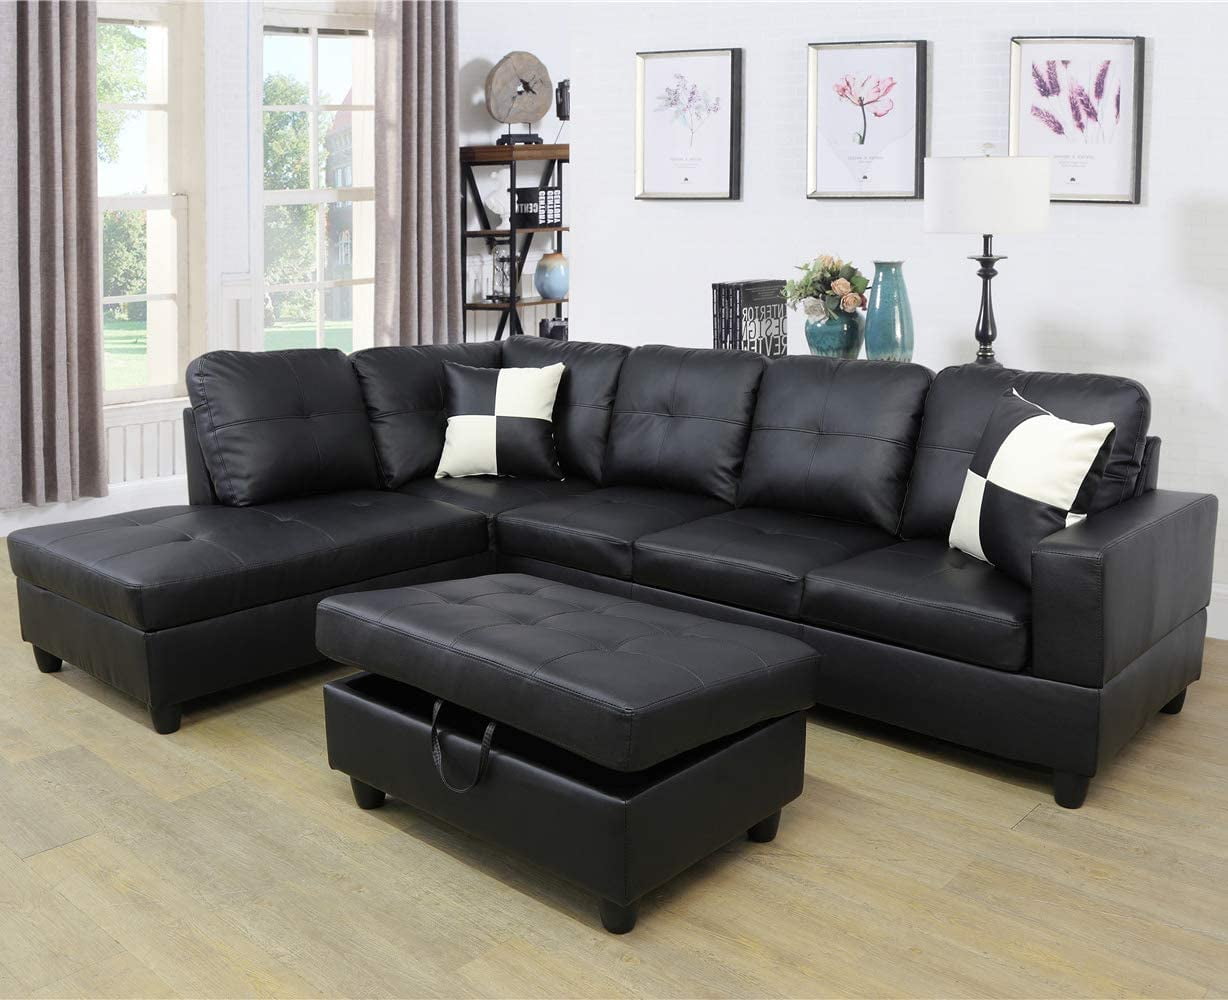 gcf faux leather 3 piece sectional sofa couch set, l-shaped modern